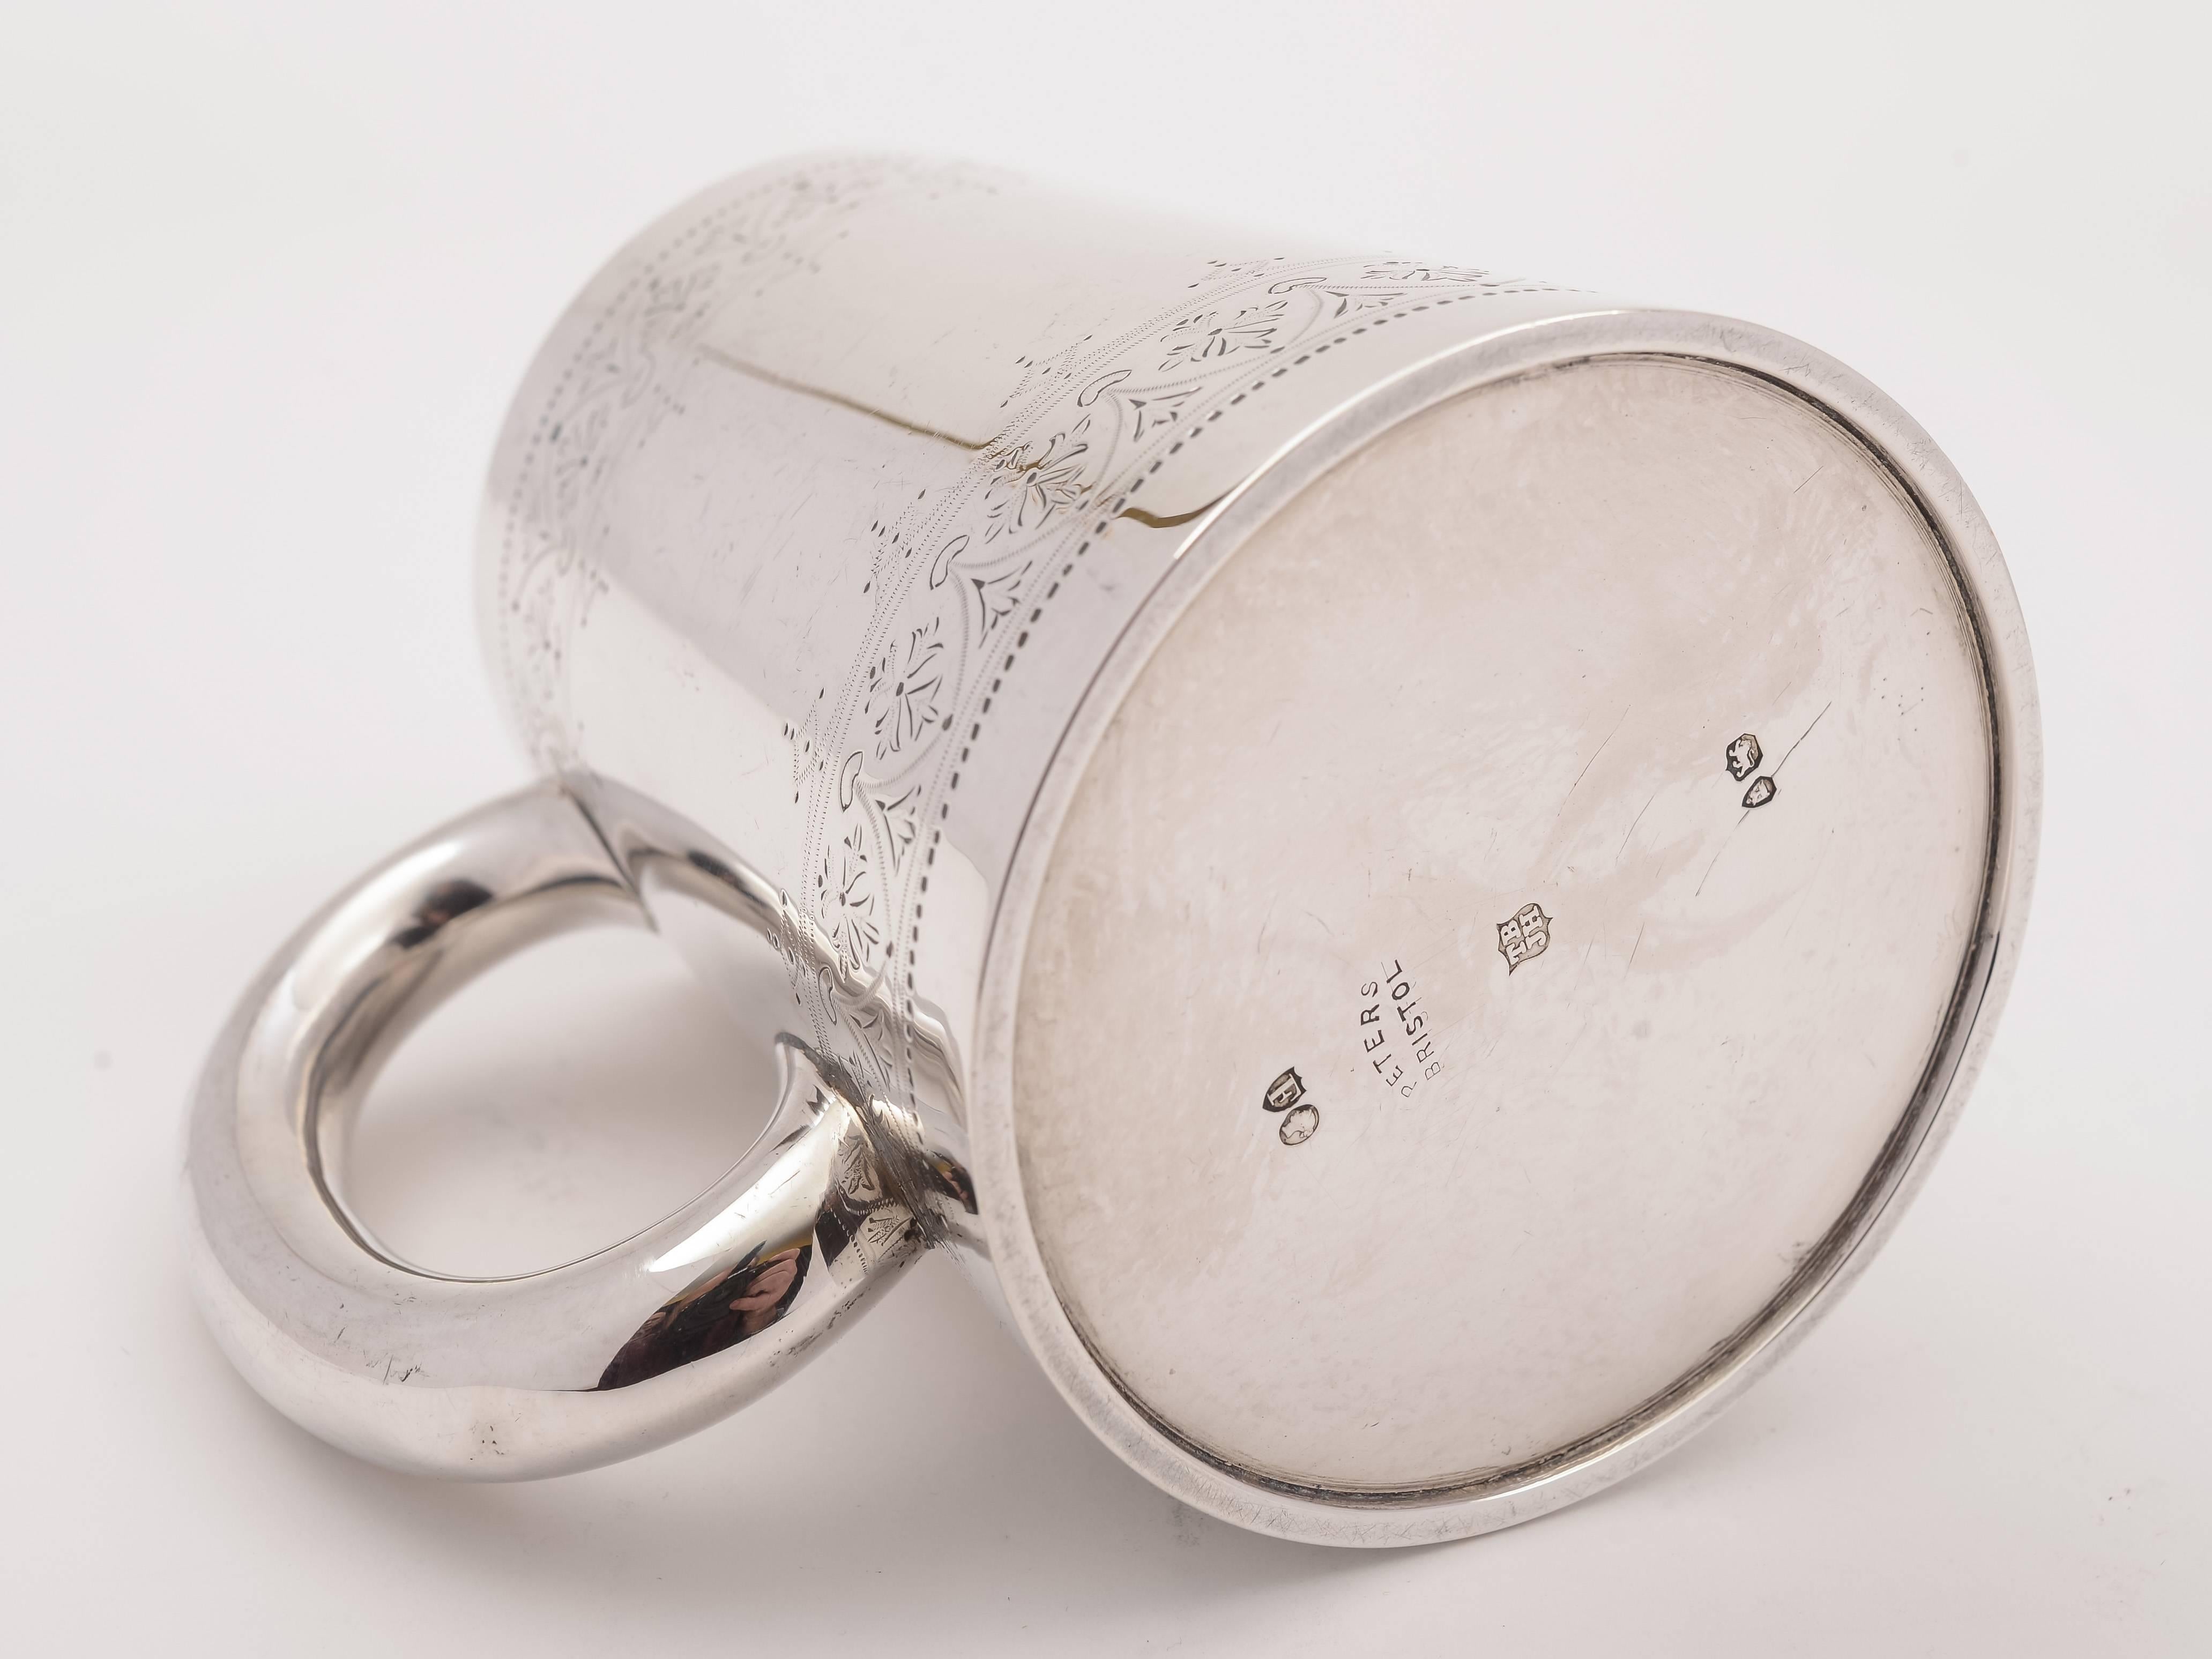 A good English Victorian silver pint tankard with lovely engraved decoration. Hallmarked London 1881 and marked 'T B J H' for the maker Thomas Bradbury & Sons. Though we only have one picture of the hallmarks, this does have a full set which can be